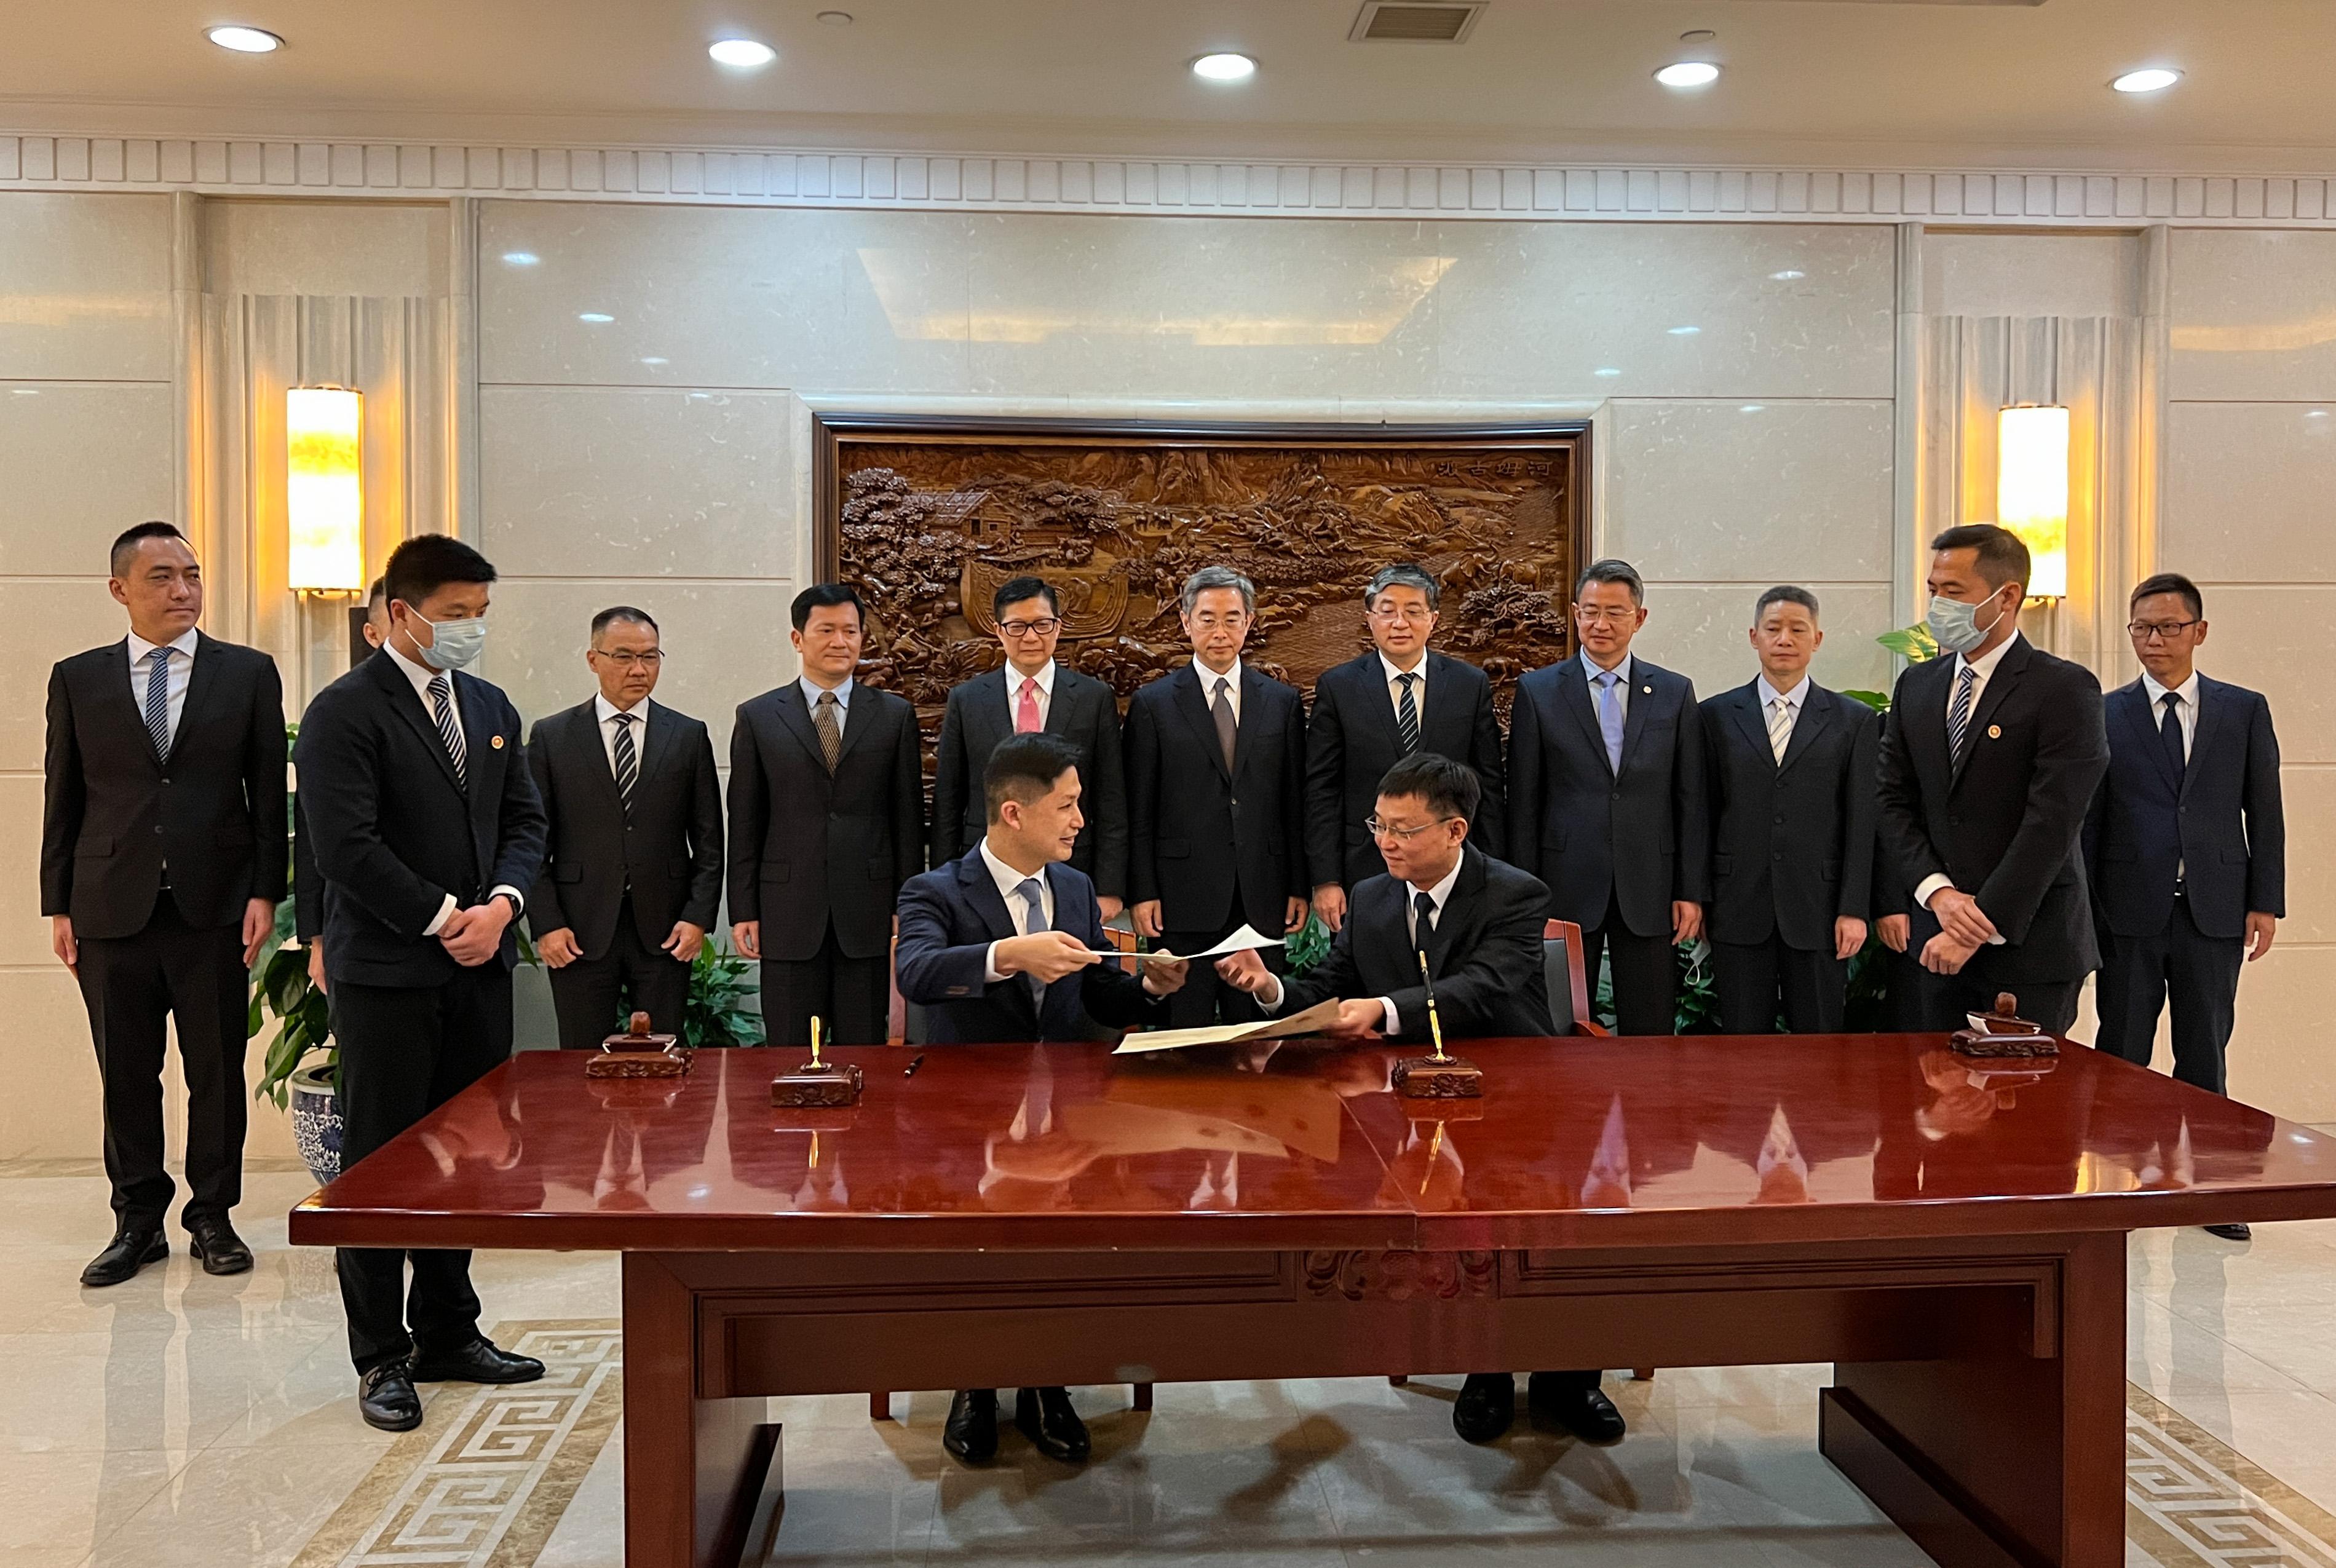 The Secretary for Security, Mr Tang Ping-keung (back row, fifth left), continued the second day of his visit to Beijing today (April 25). Photo shows the Director of Fire Services, Mr Andy Yeung (front row, second left), signing the five-year Letter of Intent of technical exchange with the Director General of the Rescue and Salvage Bureau of the Ministry of Transport, Mr Wang Lei (front row, second right). The signing of the Letter of Intent is set to strengthen technical co-operation and the exchange of rescue experiences to enhance professional standards of both sides.